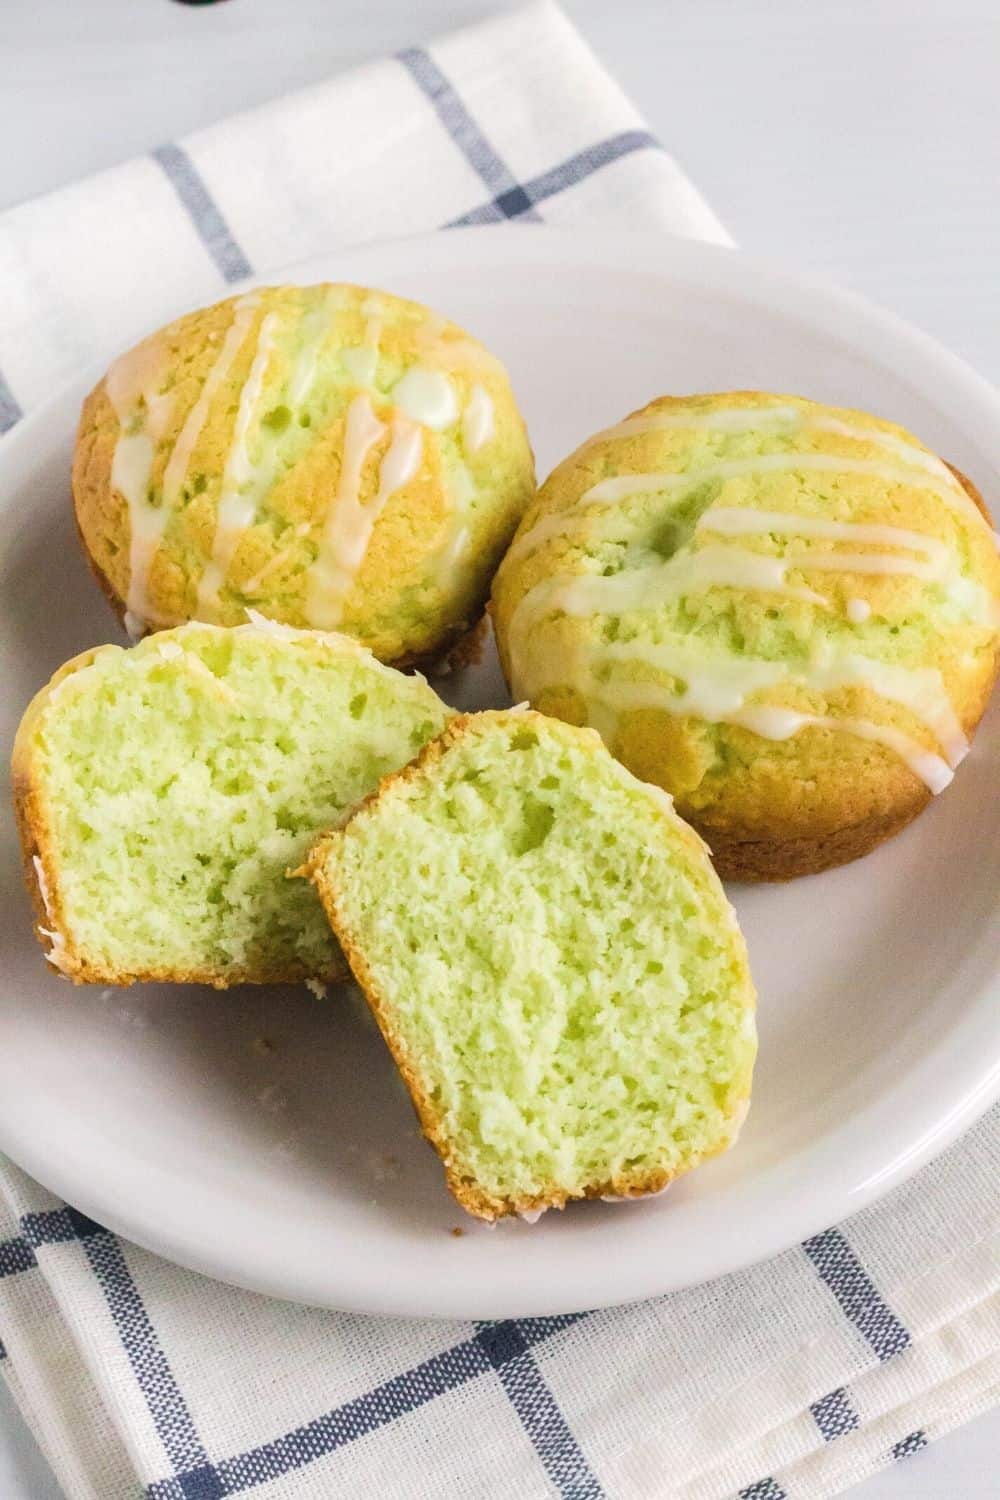 close-up view of pistachio muffins served on a white plate. The muffins are drizzled with glaze.